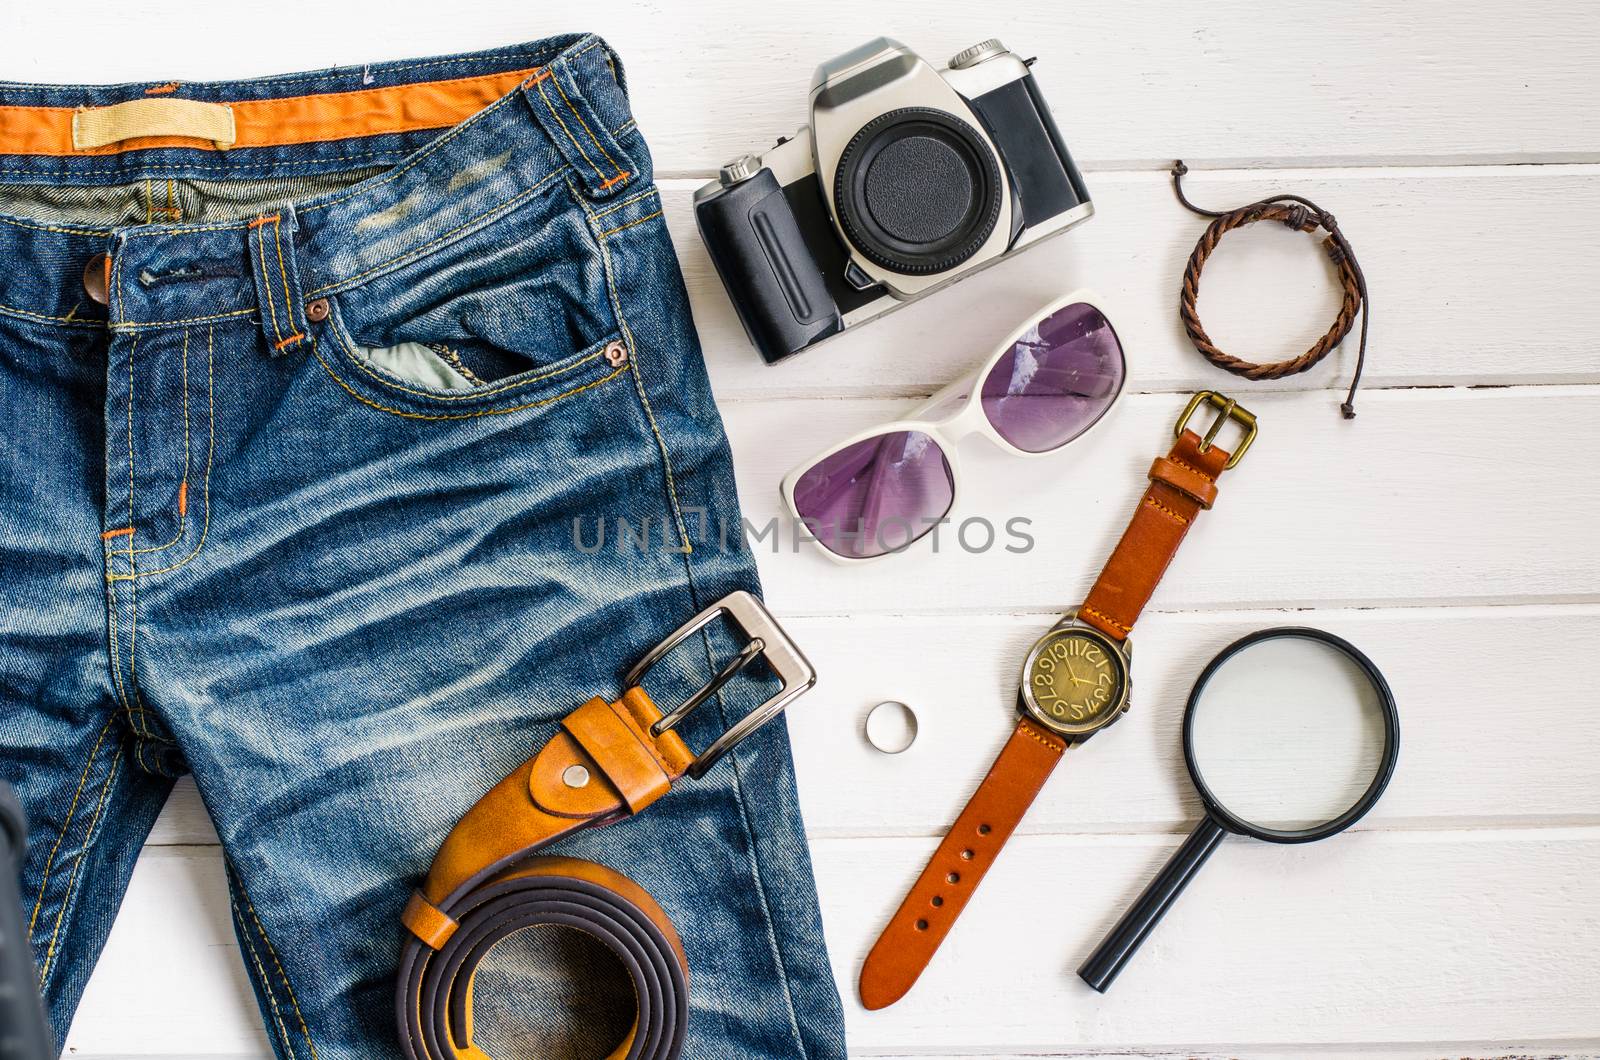 Travel accessories and costume on white background